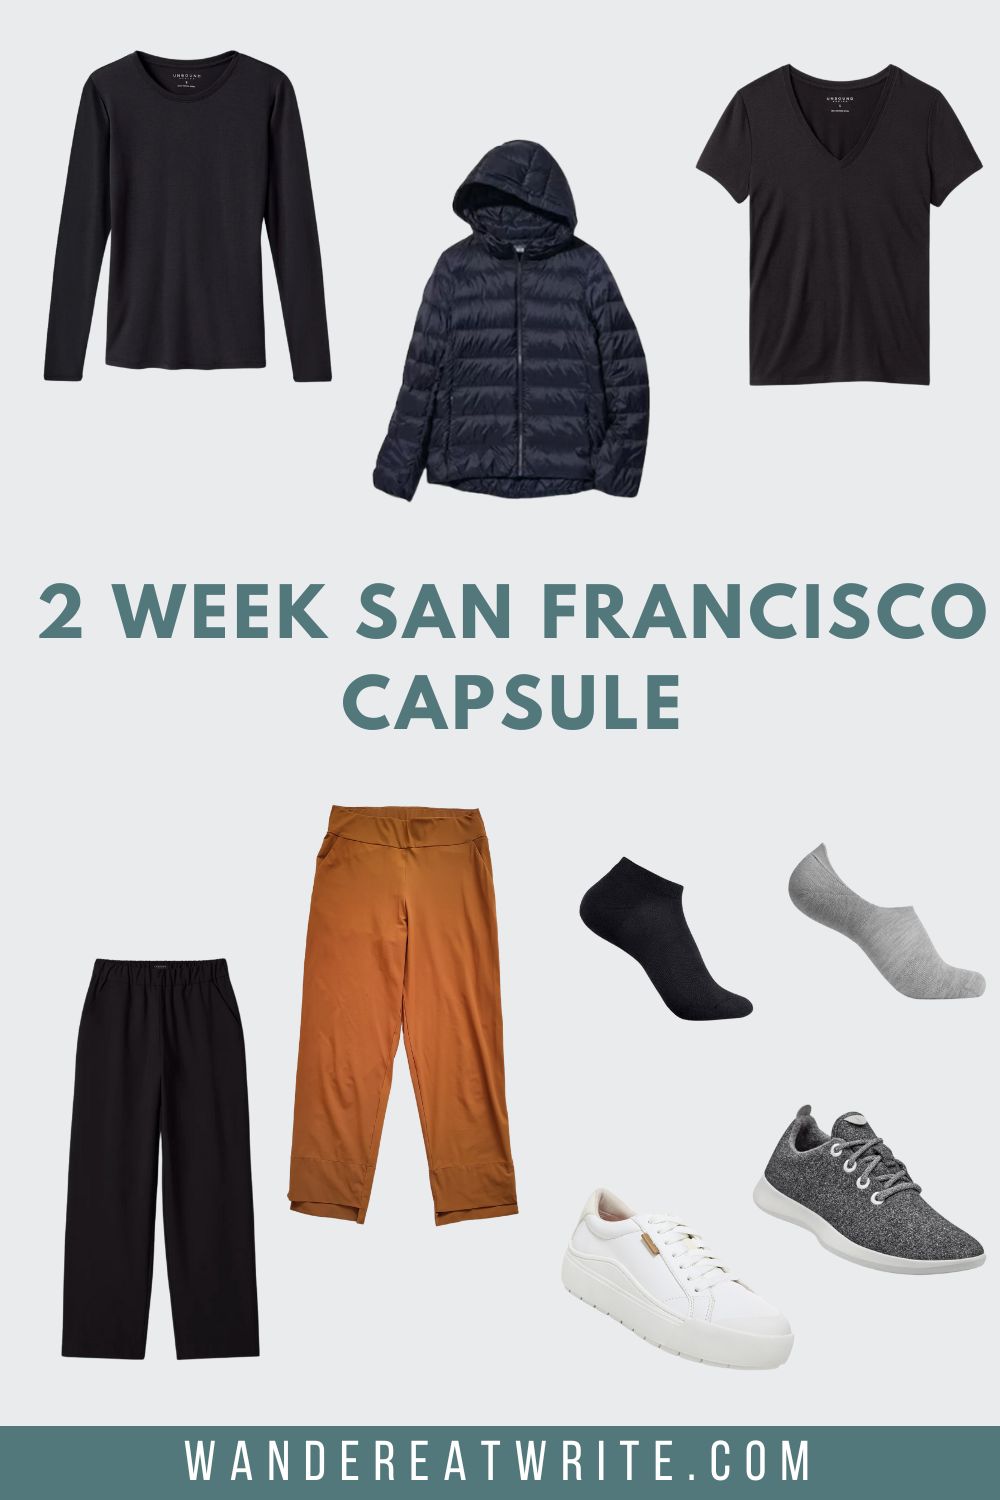 Photo collage title: 2 Week San Francisco Capsule. Top row photos: Unbound Merino long sleeve crew shirt in black, Uniqlo Ultra Light Down Parka in black, Unbound Merino wool v-neck t-shirt in black. Bottom row photos: Unbound Merino Lightweight Travel Pants in black, Aday Straight Up pants in pecan, Unbound Merino ankle socks in black, Unbound Merino no-show socks in gray, Dr. Scholl's Time Off shoes in white, Allbirds wool runner shoes in gray